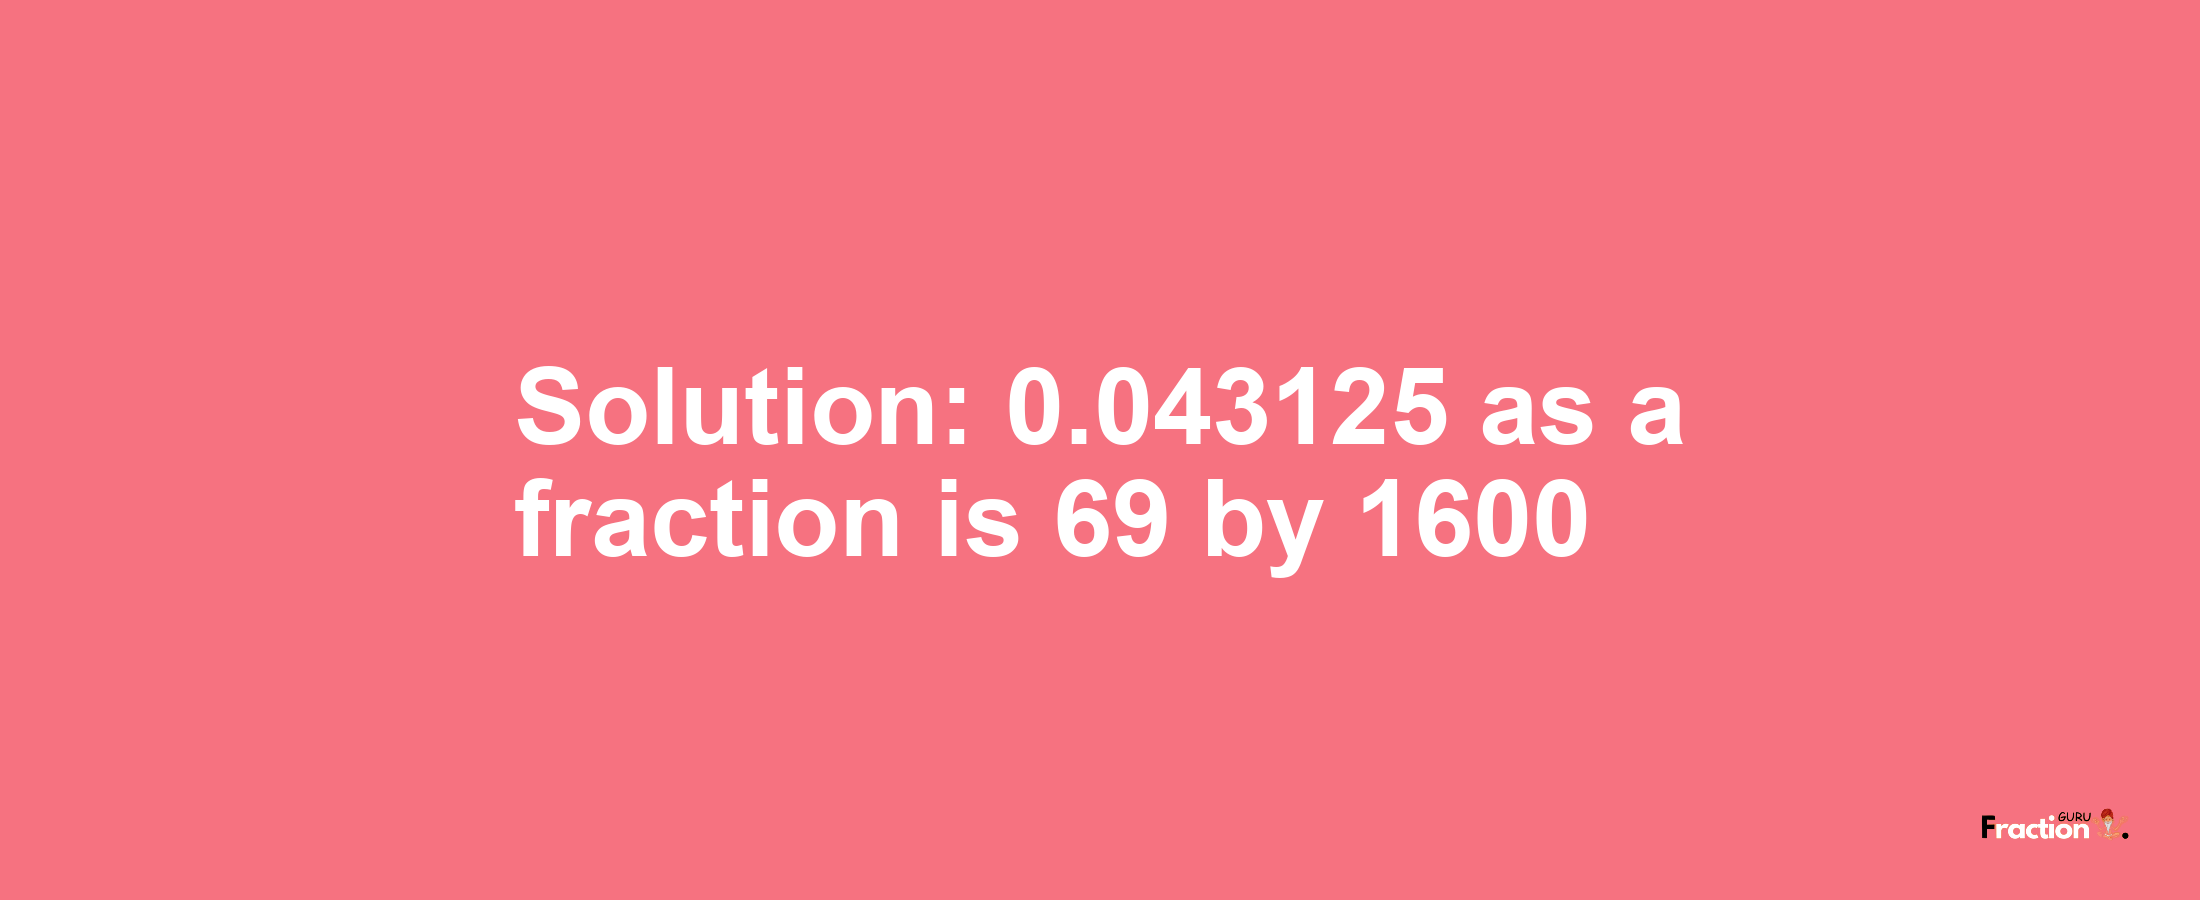 Solution:0.043125 as a fraction is 69/1600